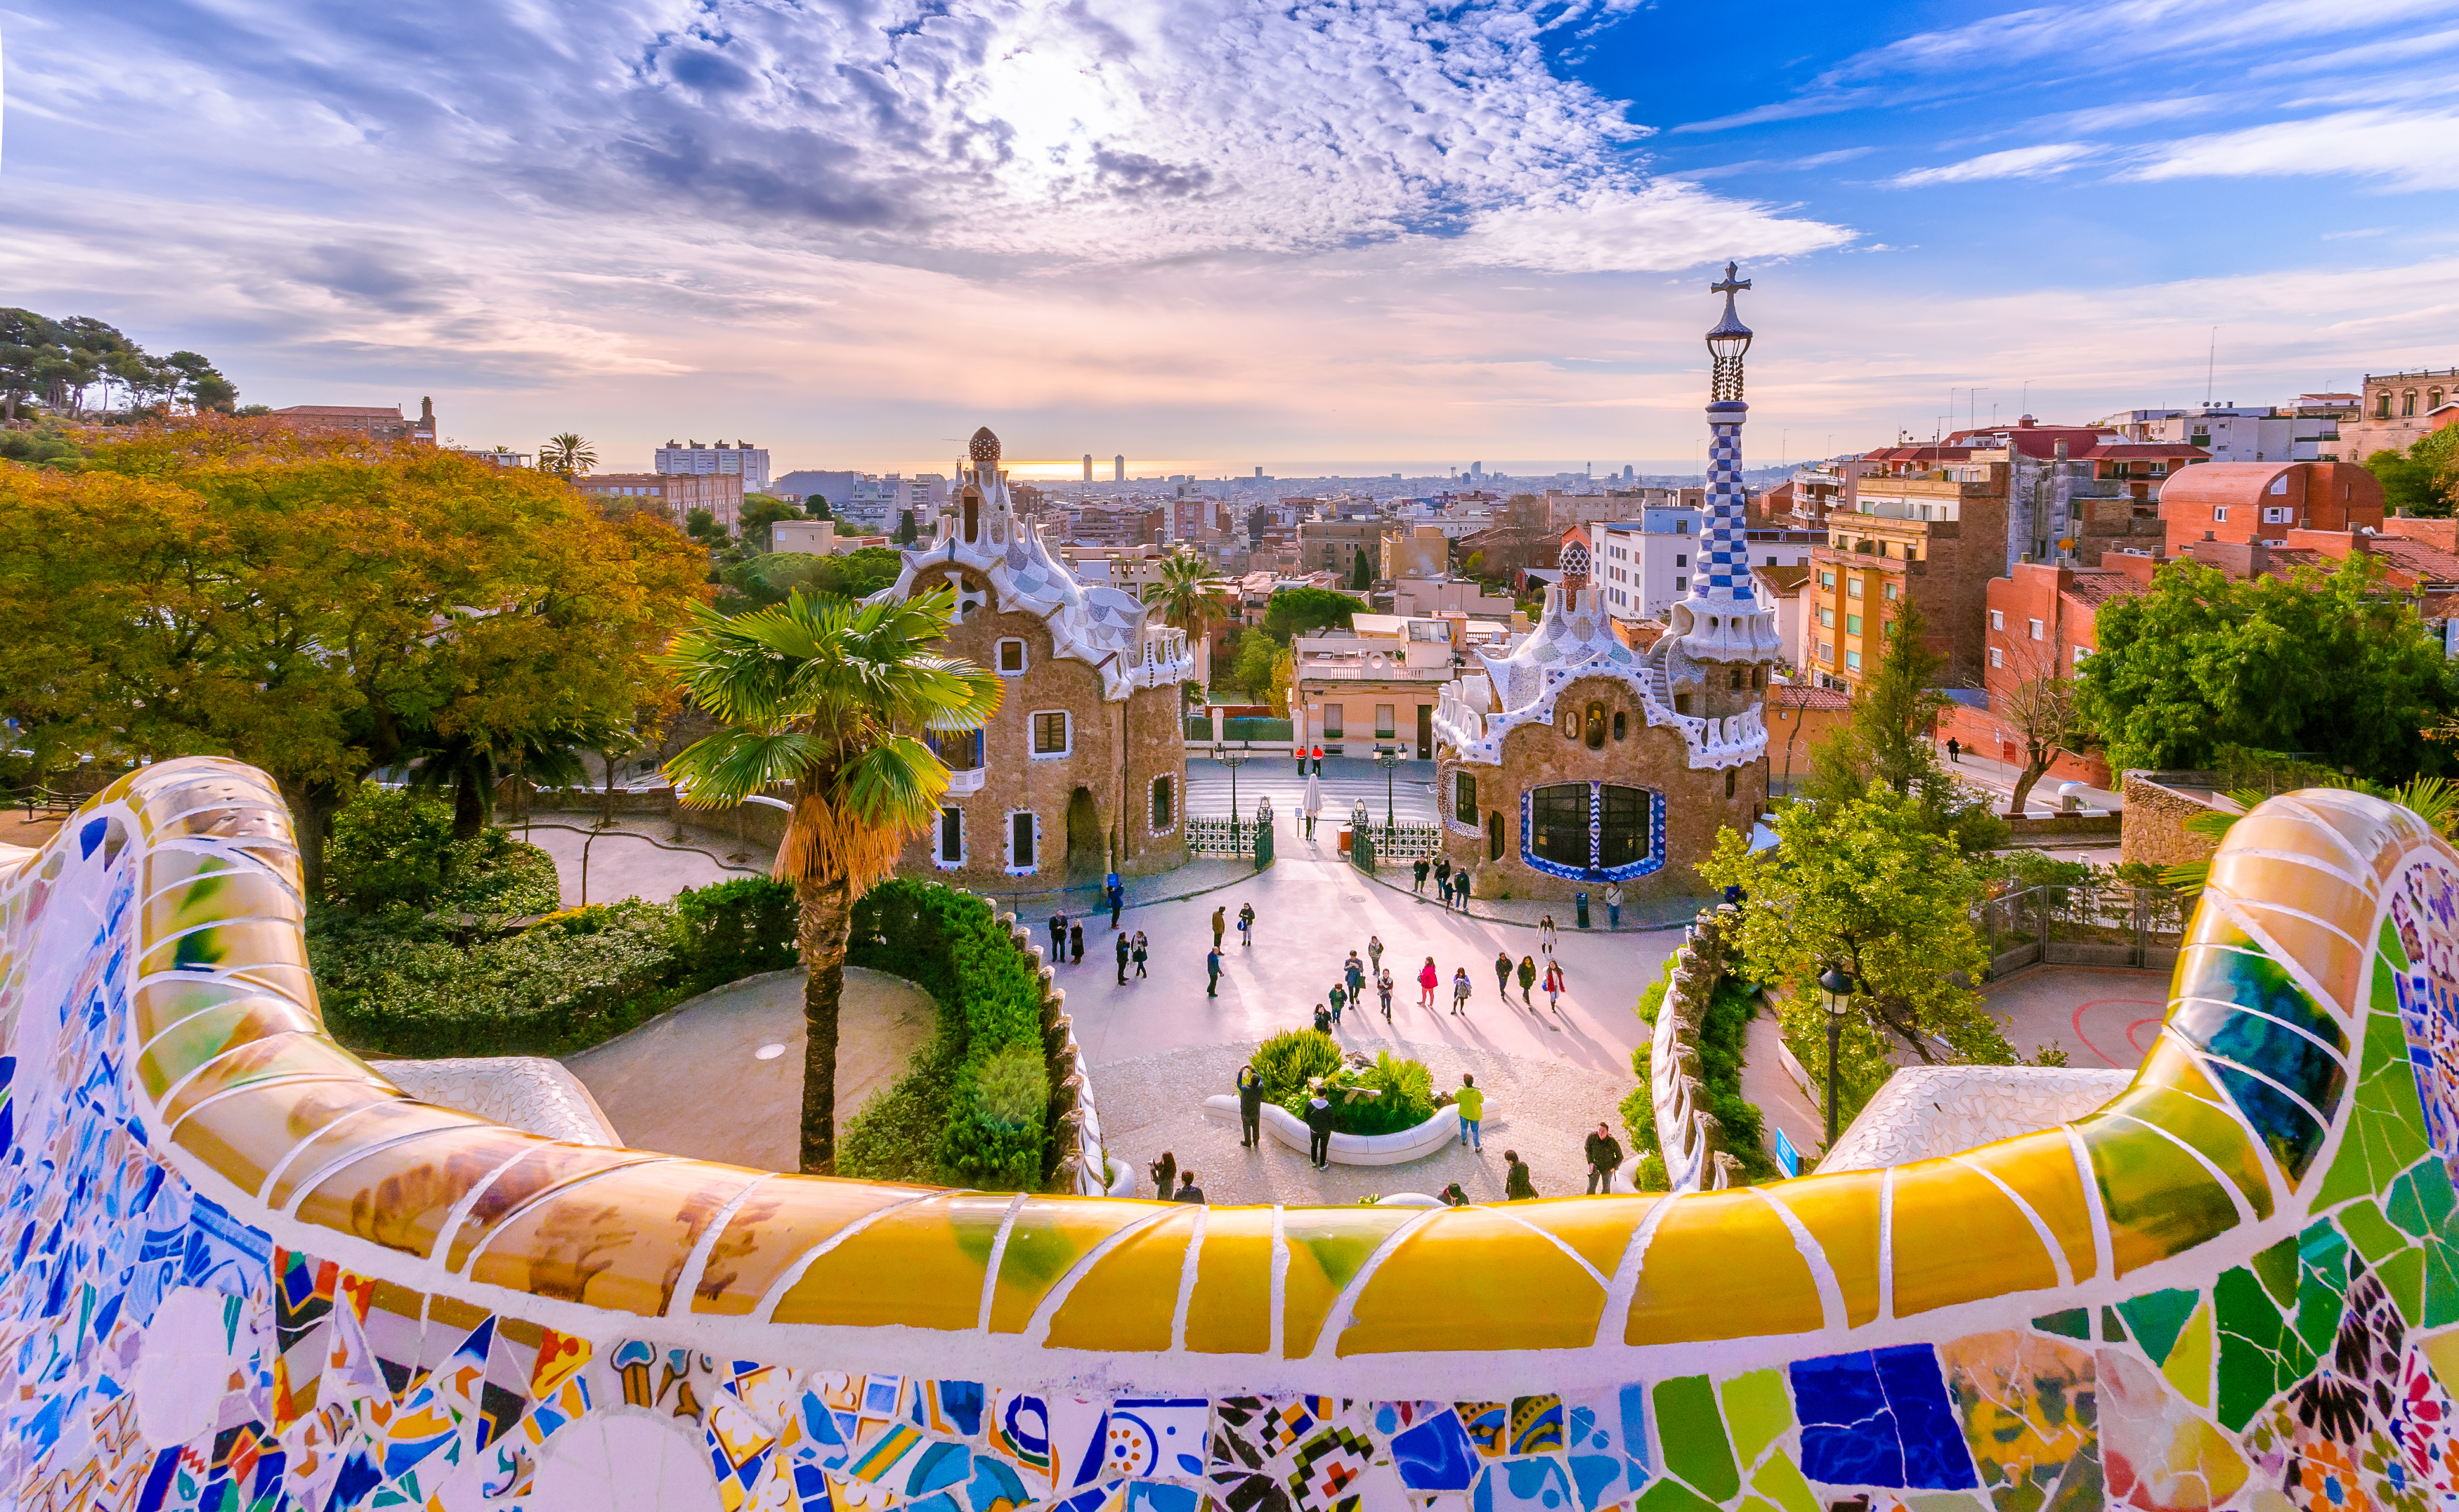 Running in Barcelona, between the Parc Guëll and the Sagrada Familia, will take you to a veritable open-air museum dedicated to Gaudi's works. The city is full of majestic historic buildings, and its modern waterfront mixes tourists and surfers alike.